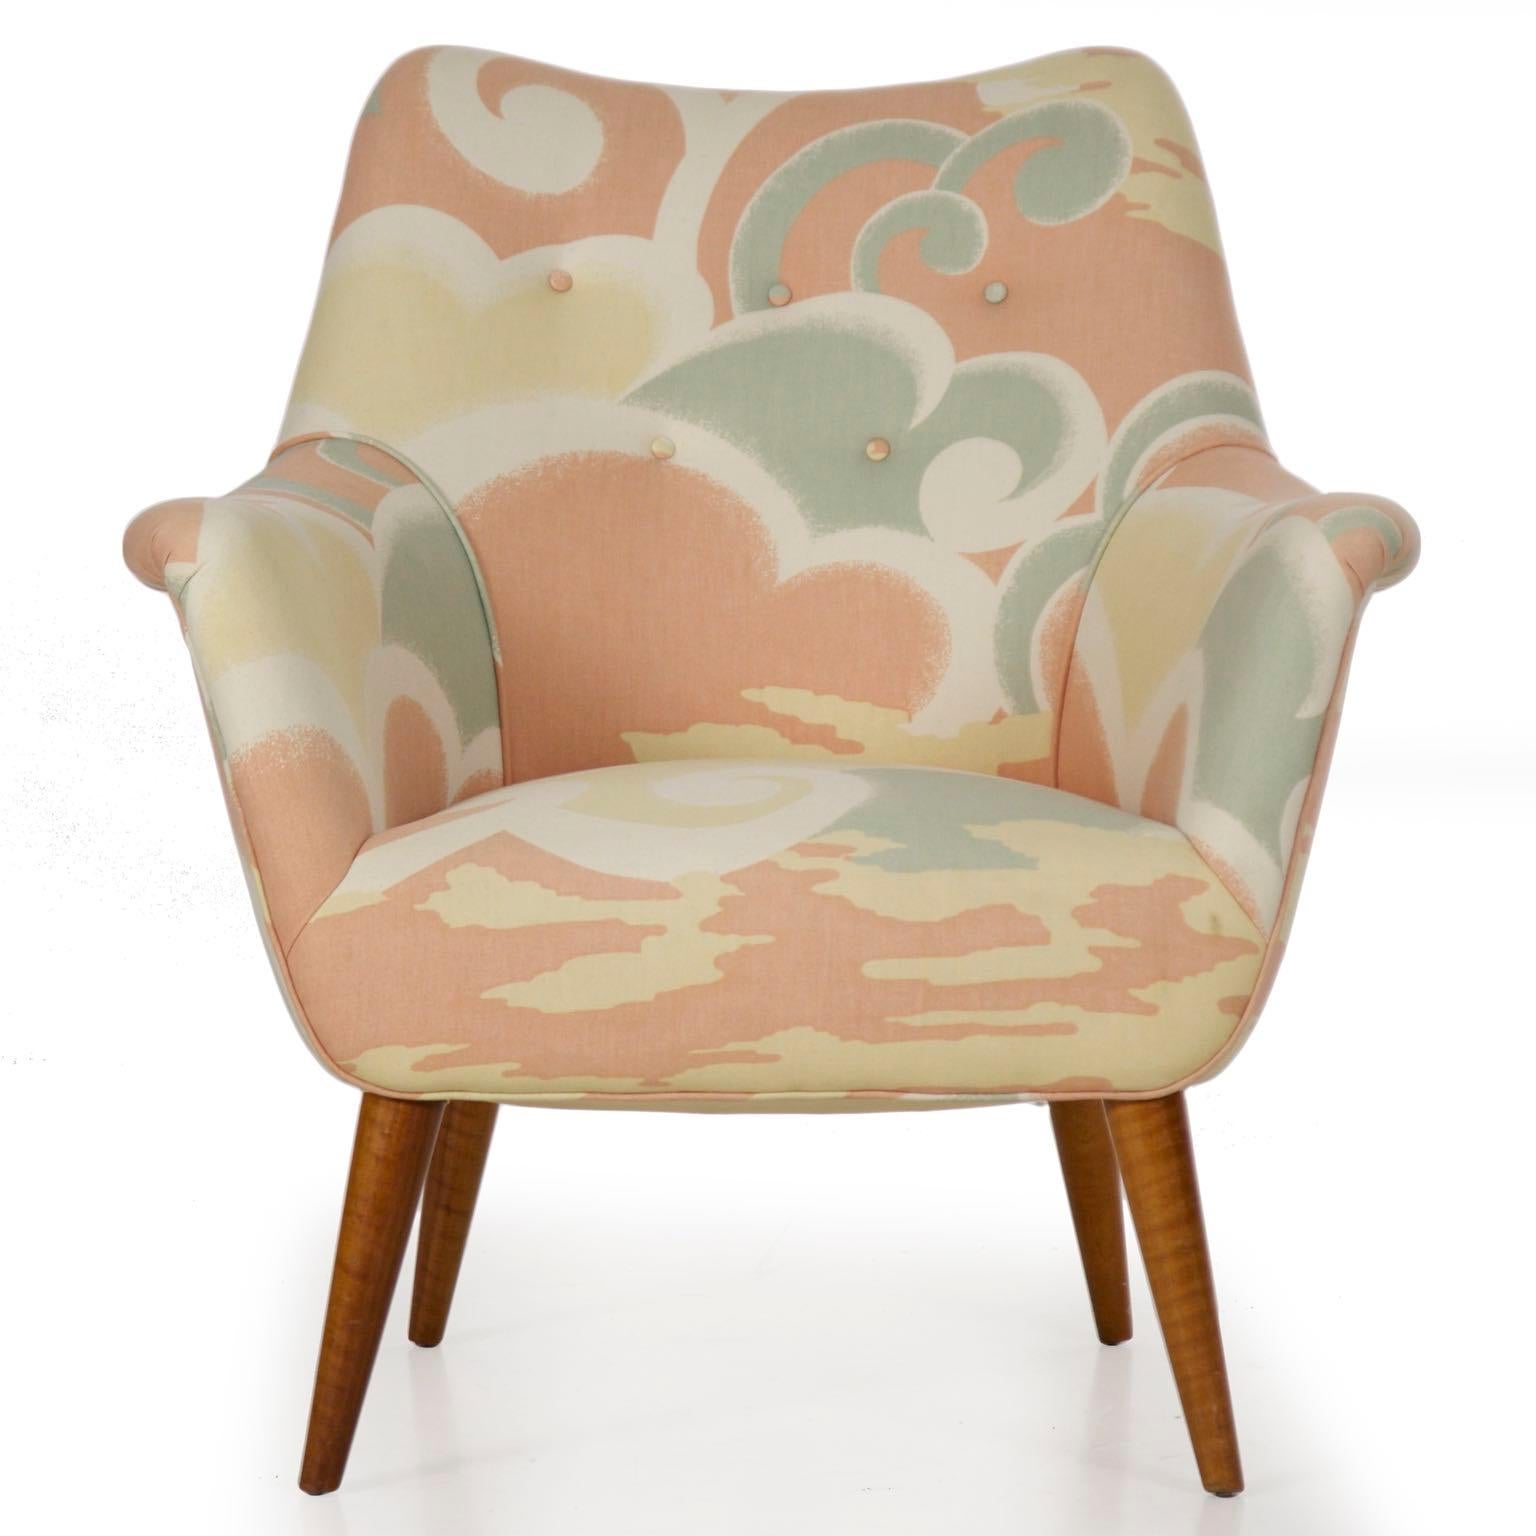 A very nice circa 1960s armchair in a vibrant period printed fabric, the chair has wonderful form and quality about it. It rests over tapered outward splayed maple legs and is incredibly comfortable. It is an excellent strikepoint for the modern